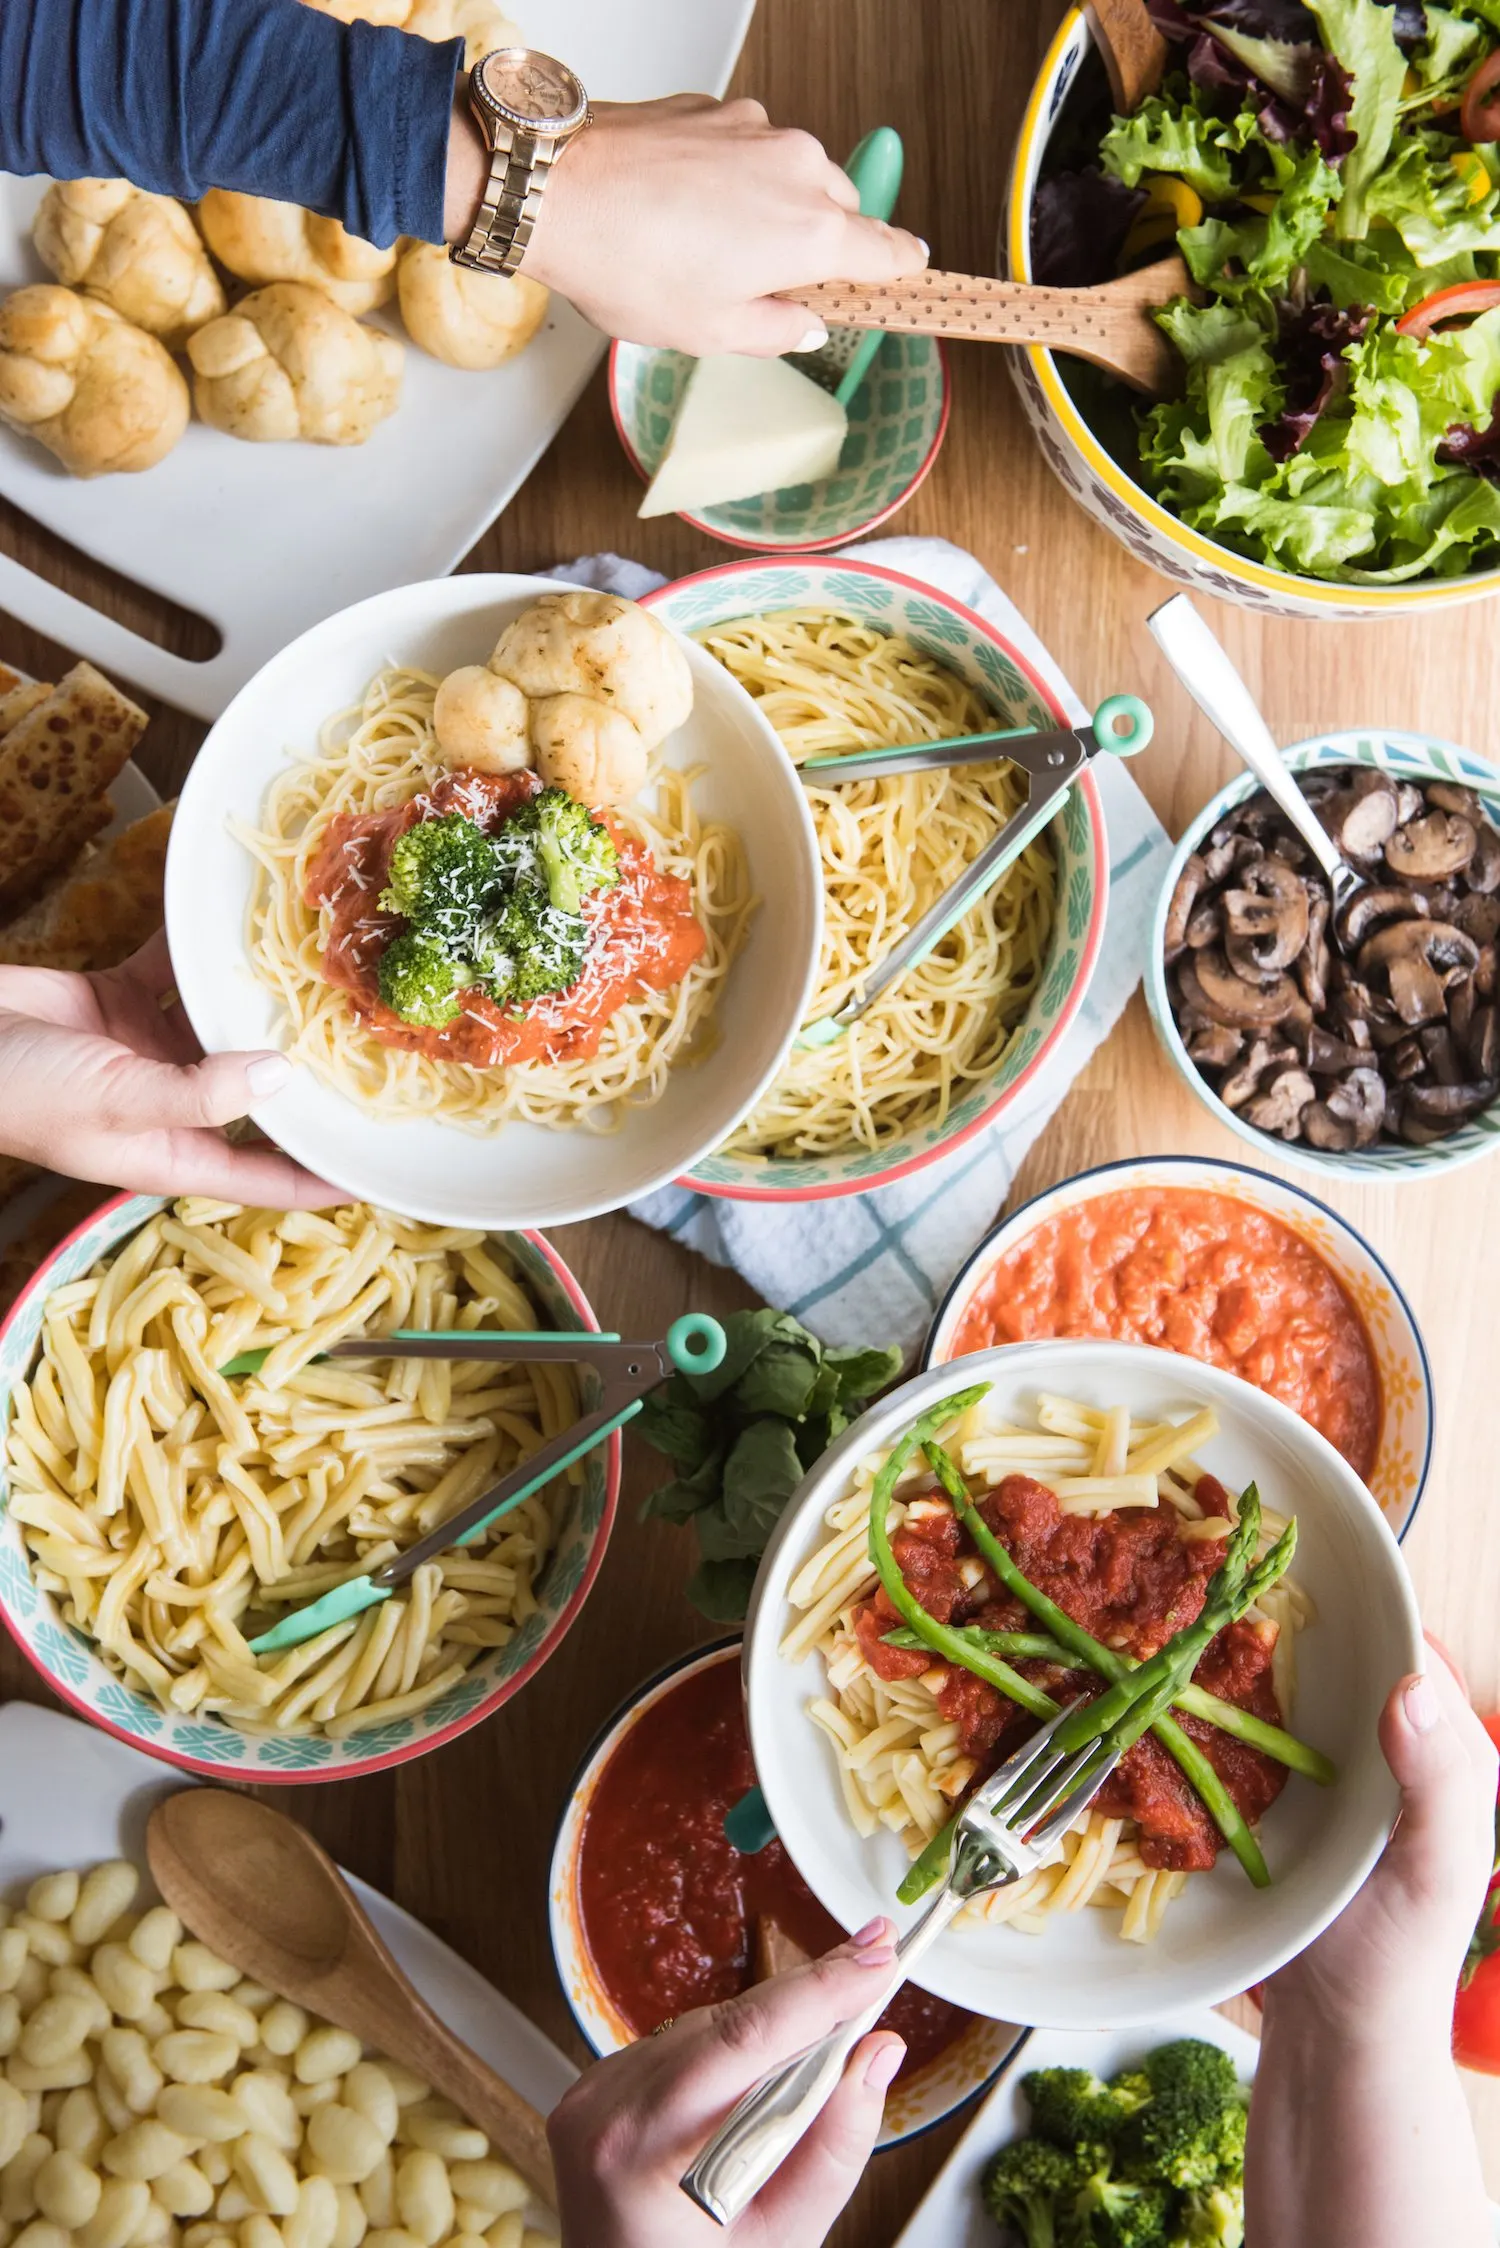 Entertain with a Make Your Own Pasta Bar | Click through to visit The Sweetest Occasion for entertaining tips, party ideas, party recipes and more from @cydconverse